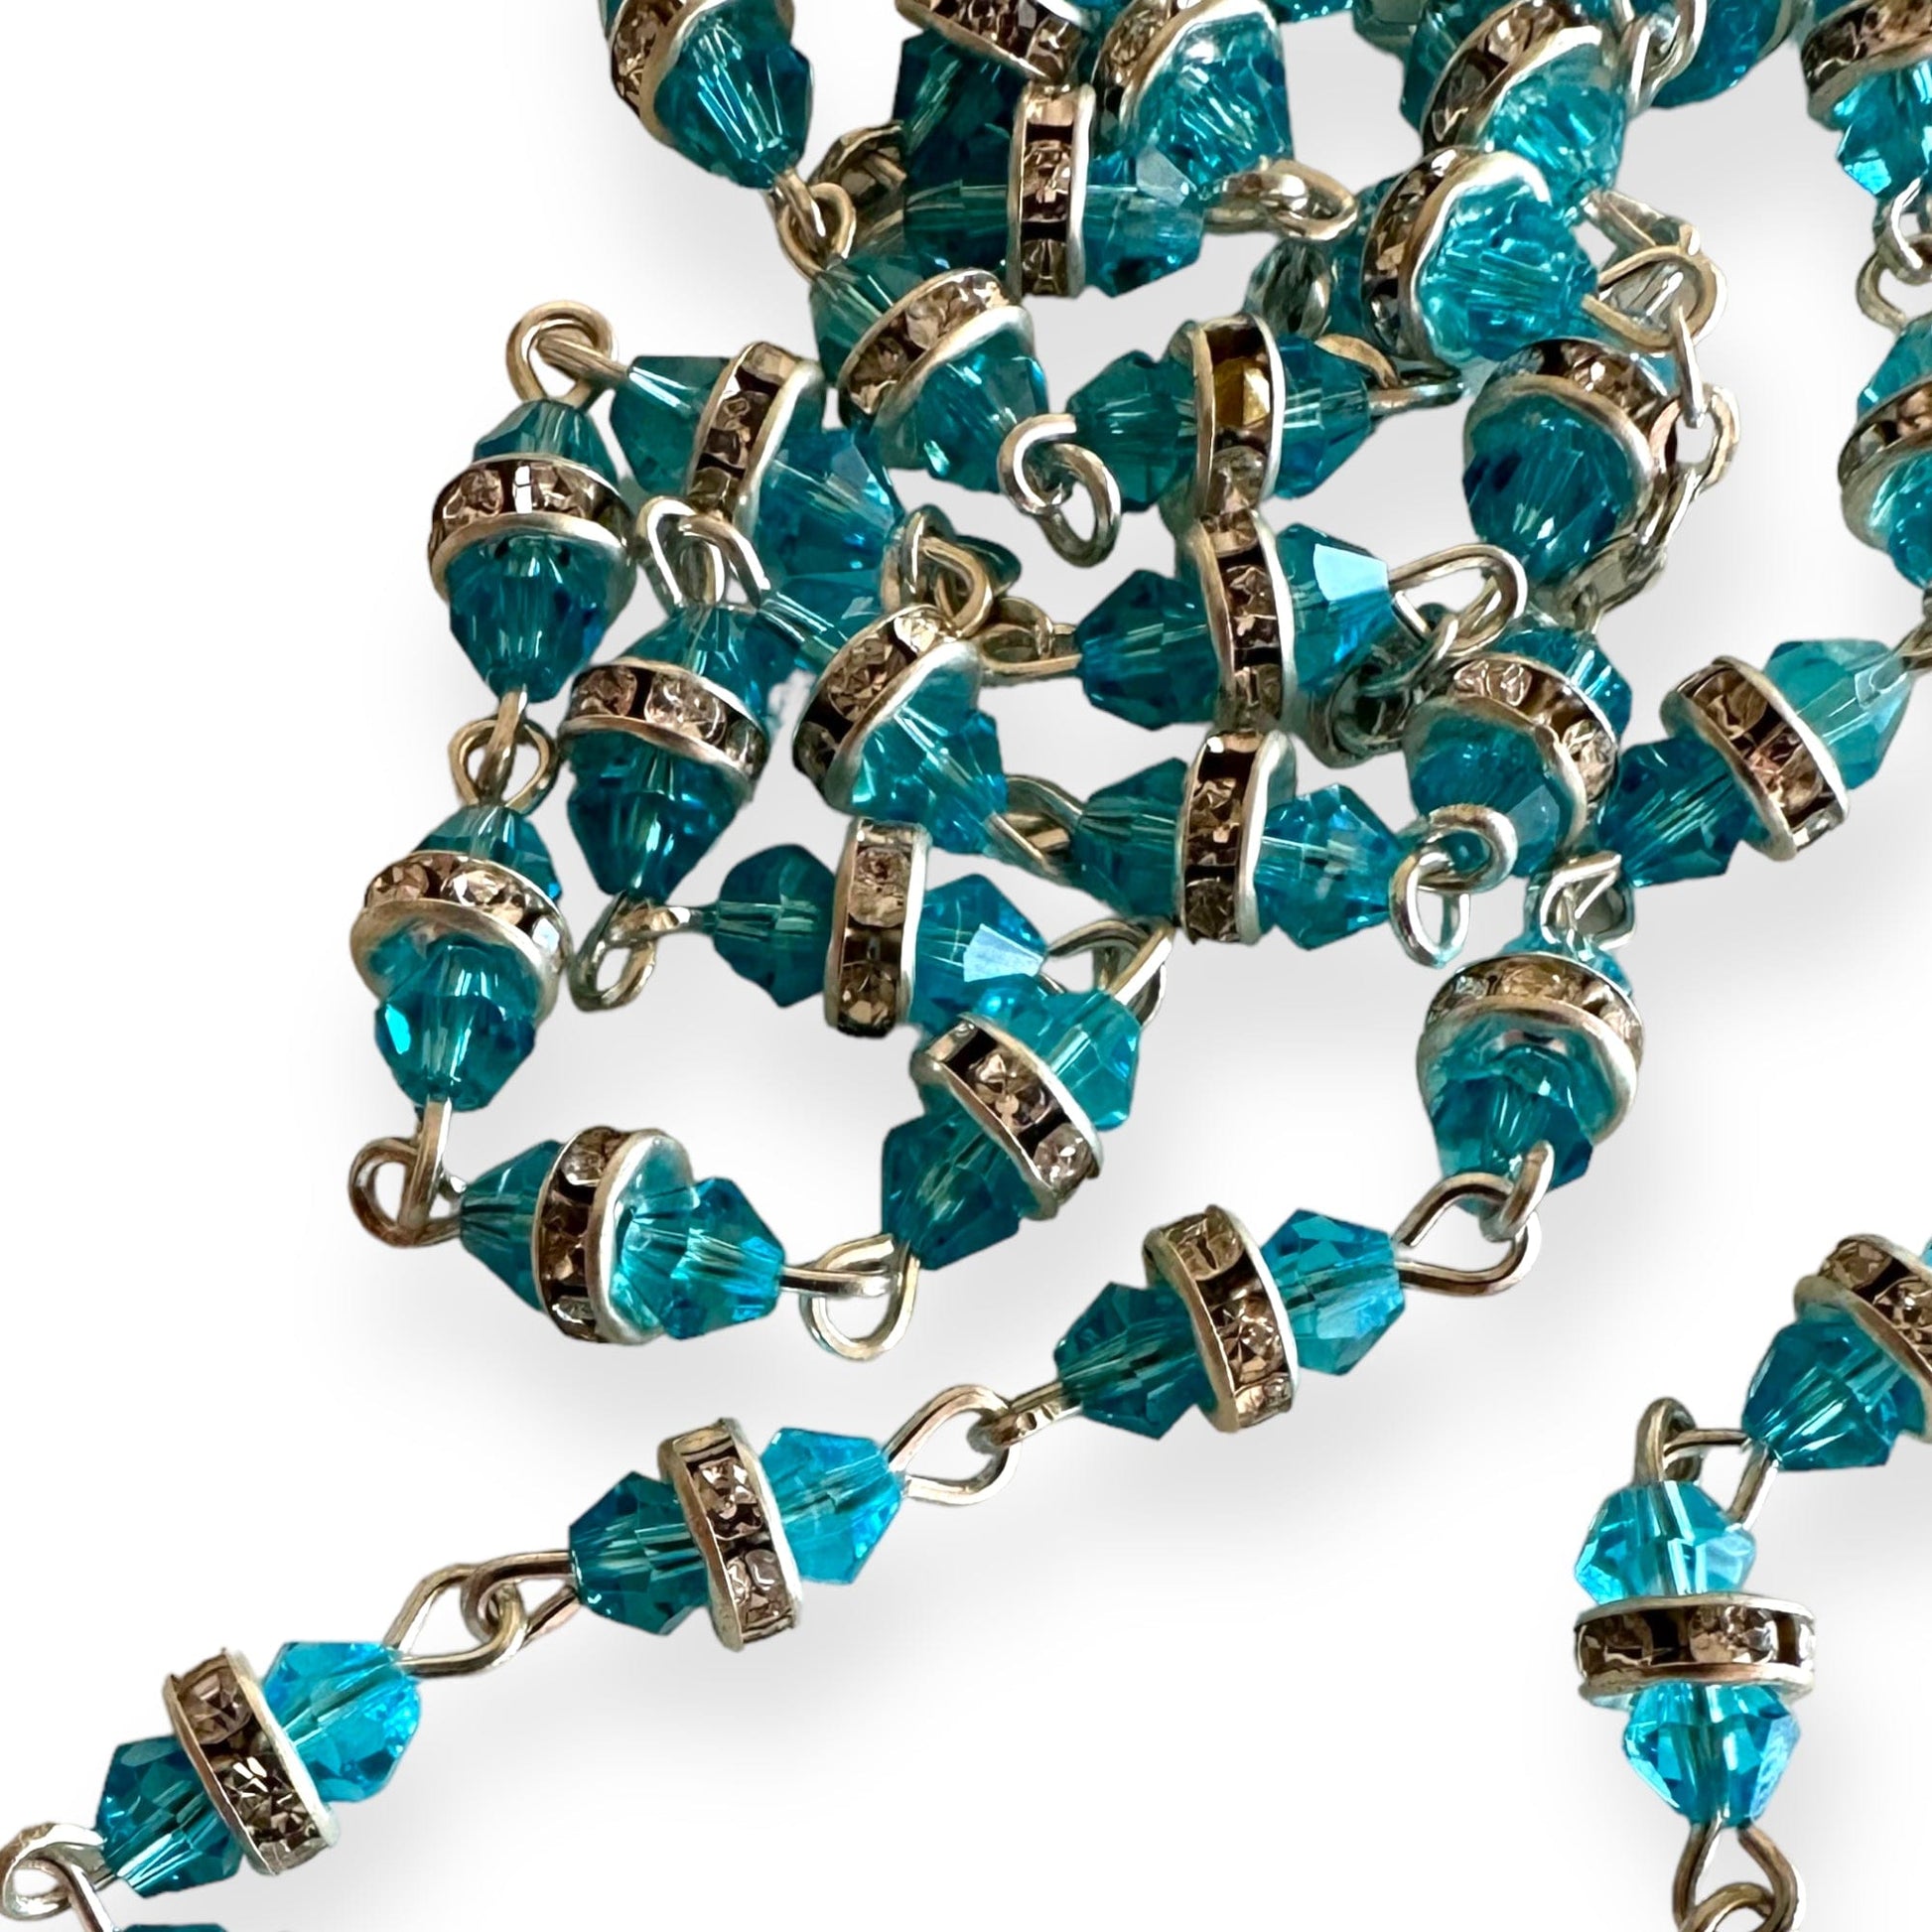 Catholically Rosaries Blessed Virgin Mary - Aqua Shiny Crystal Rosary - Rhinestone - Blessed By Pope